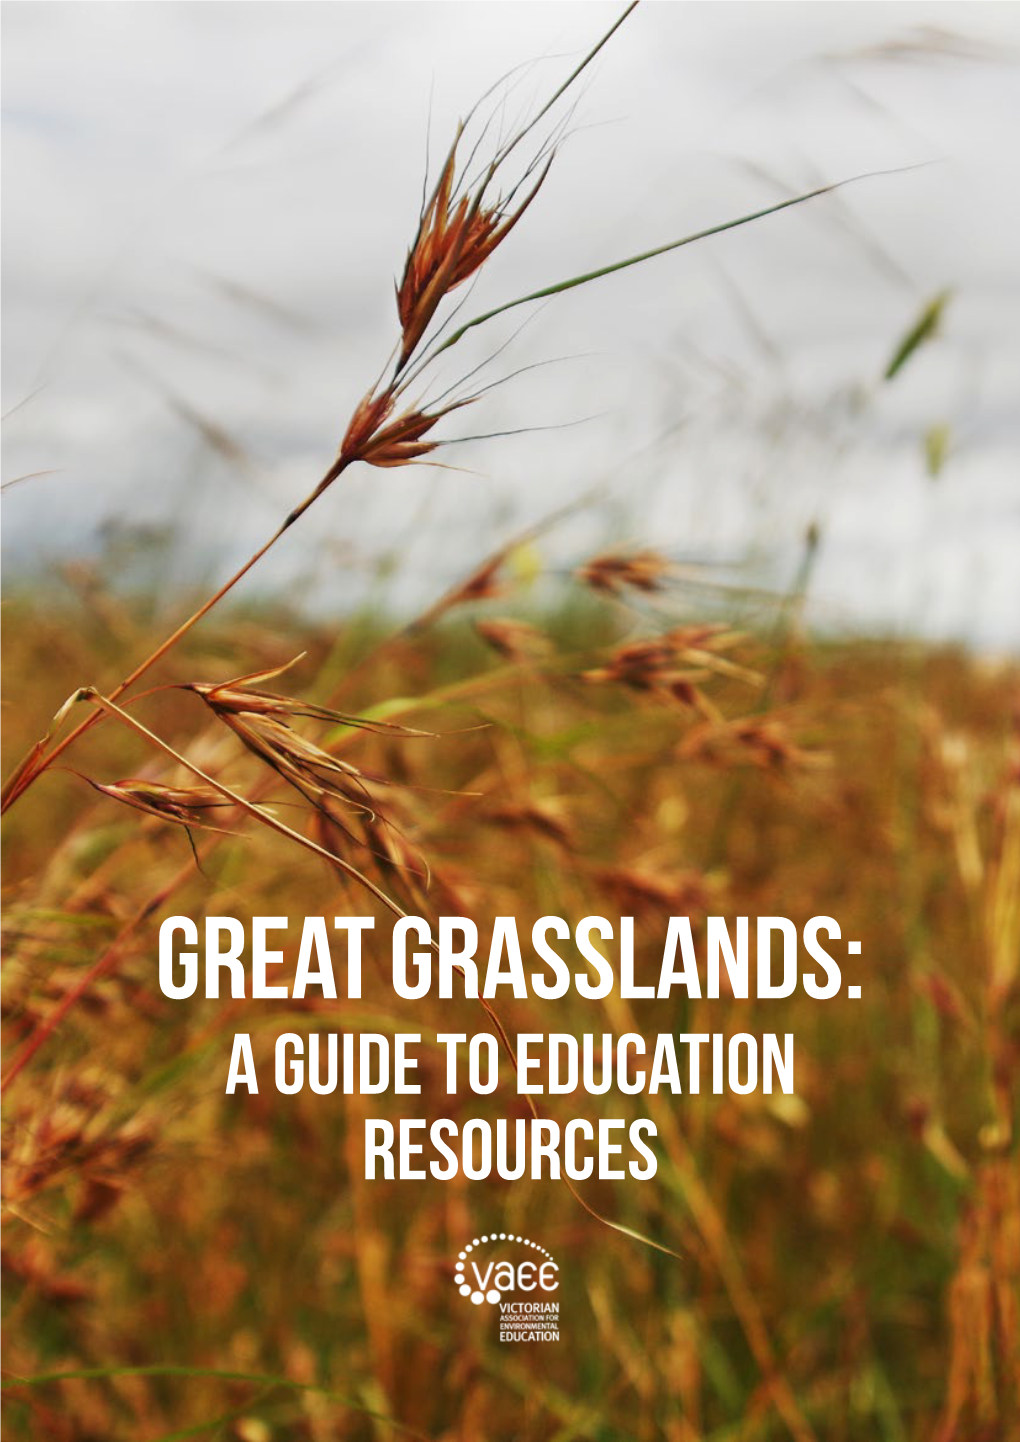 A Guide to Education Resources